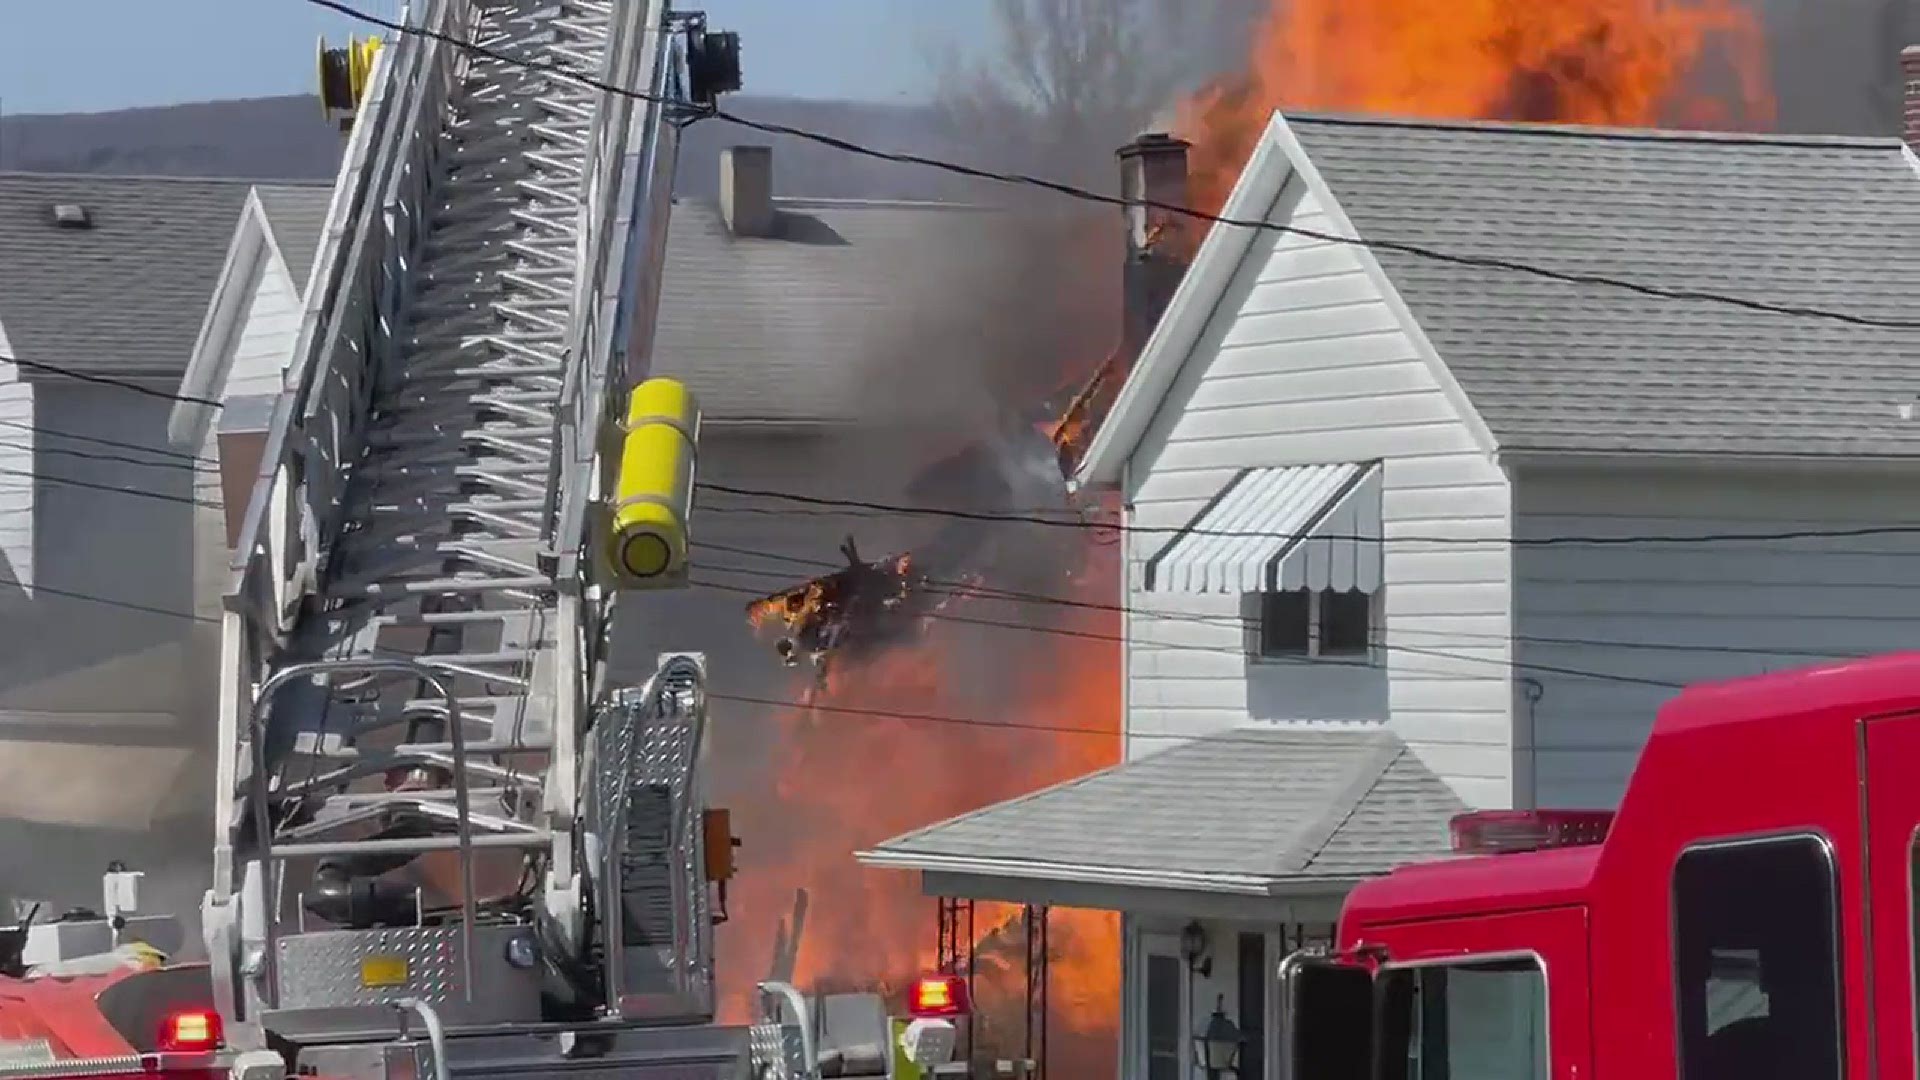 The blaze on Amherst Street broke out Thursday afternoon